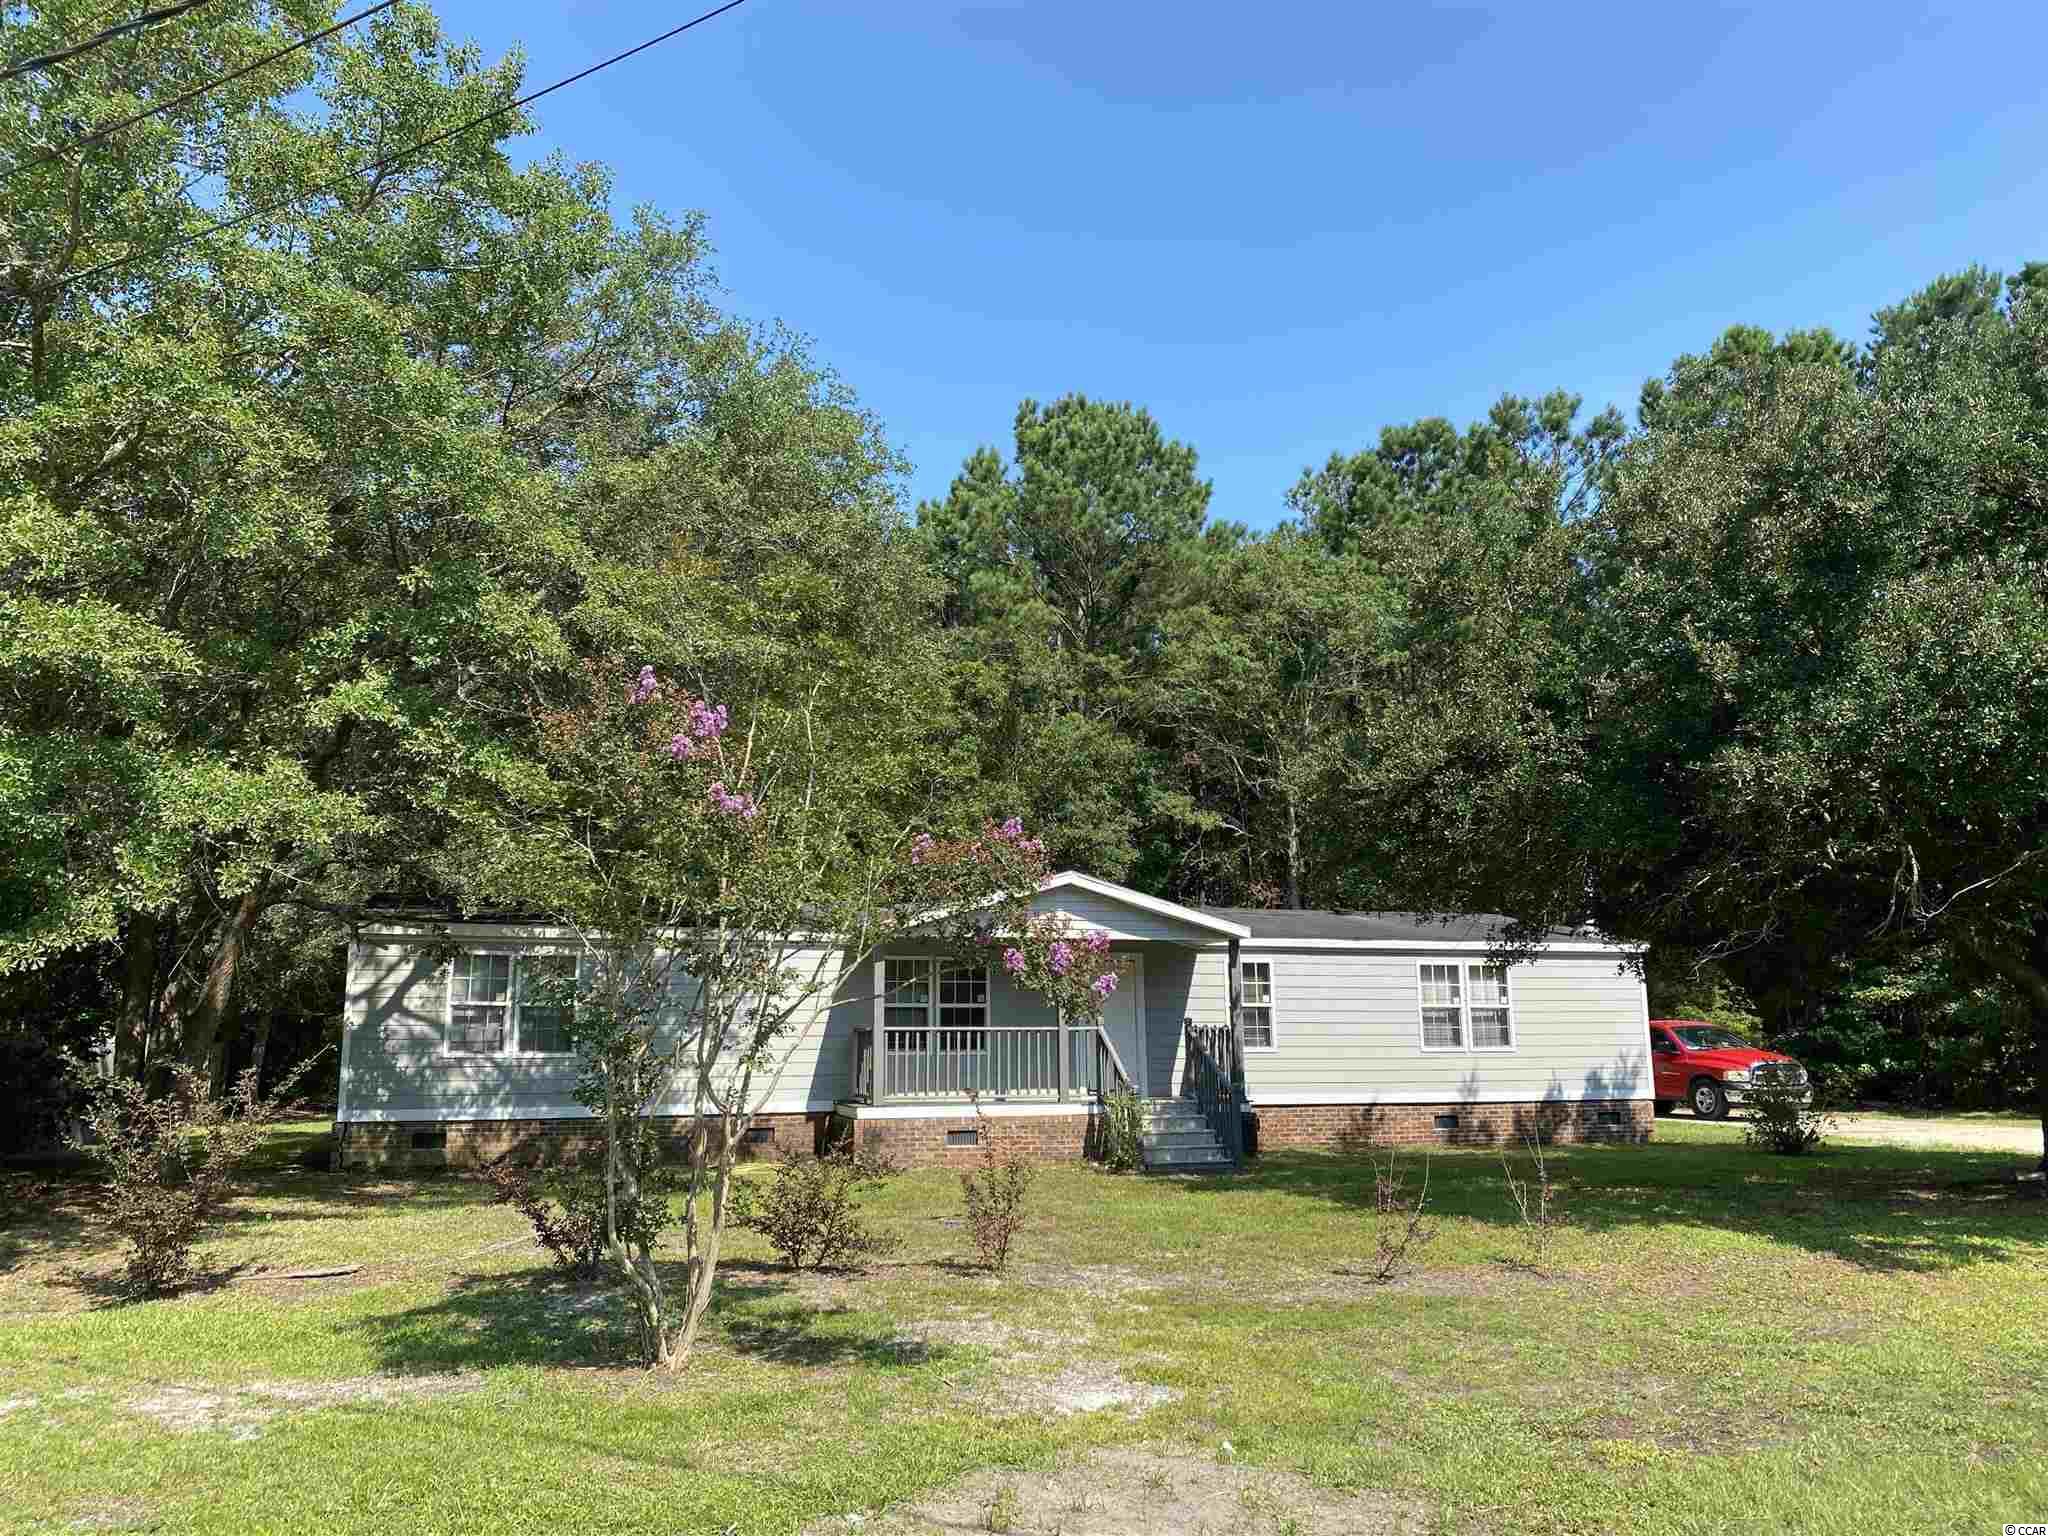 295 Russell Dr. Pawleys Island, SC 29585